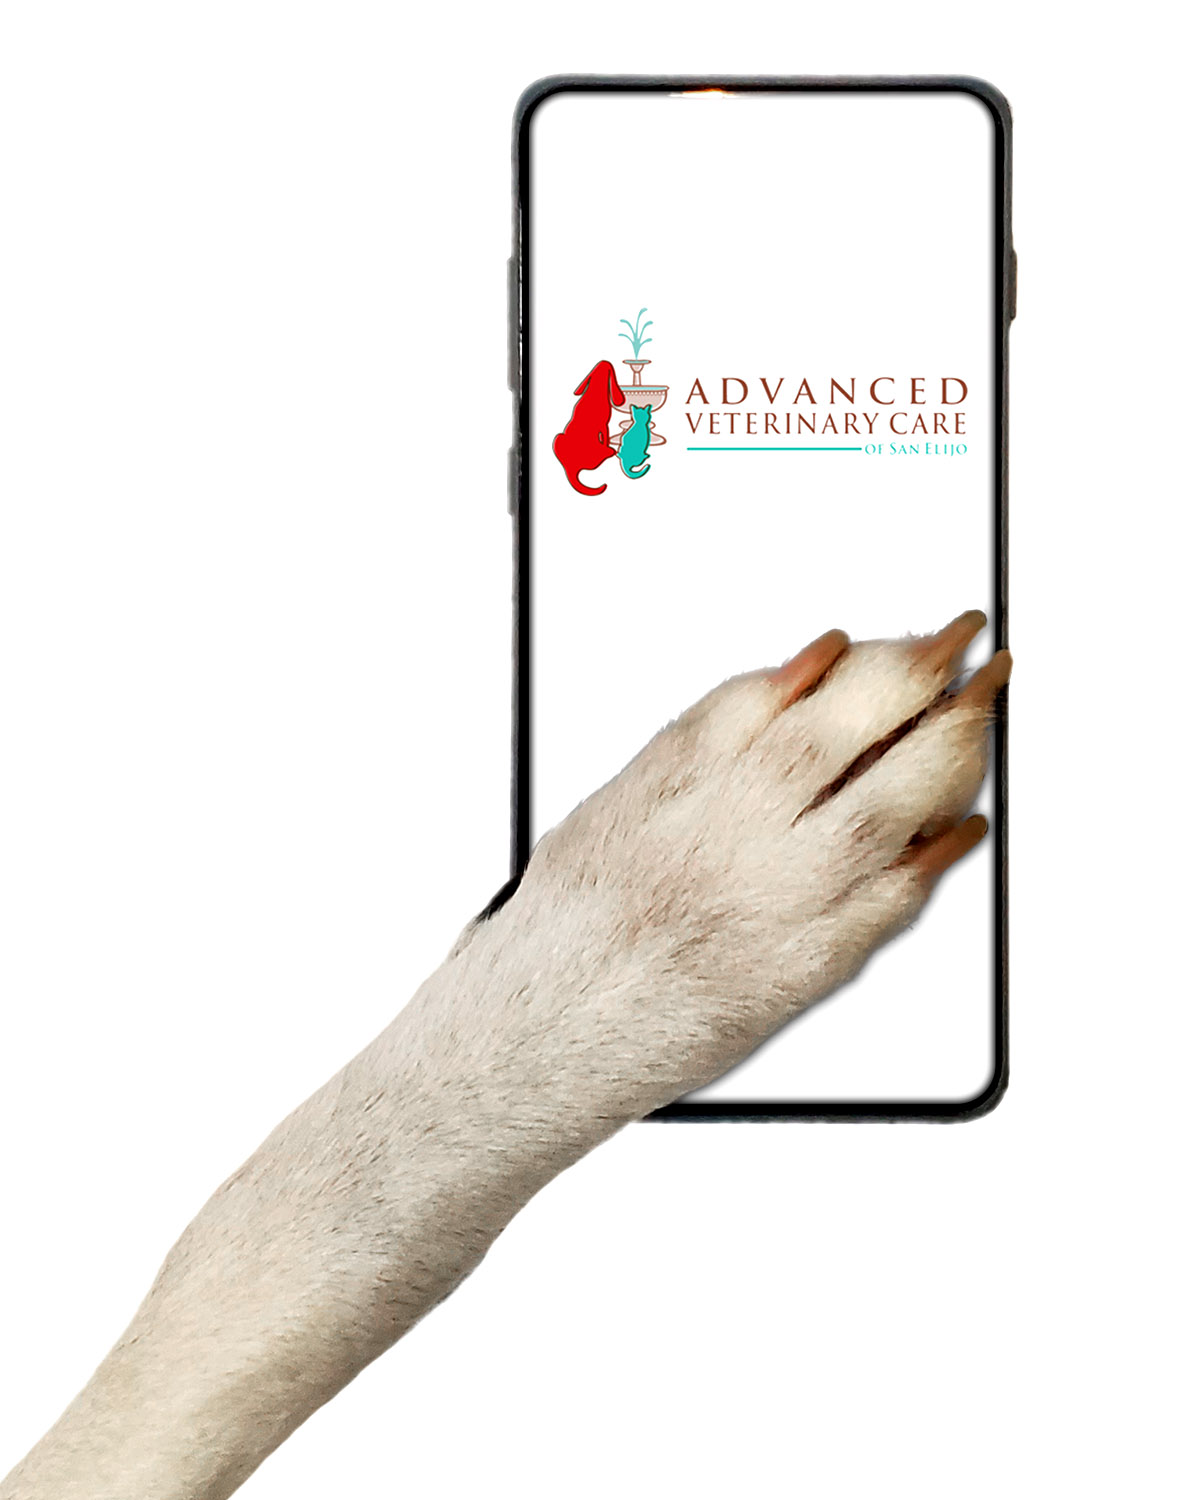 Veterinary Telemedicine Services: image of dog's paw on cell phone.